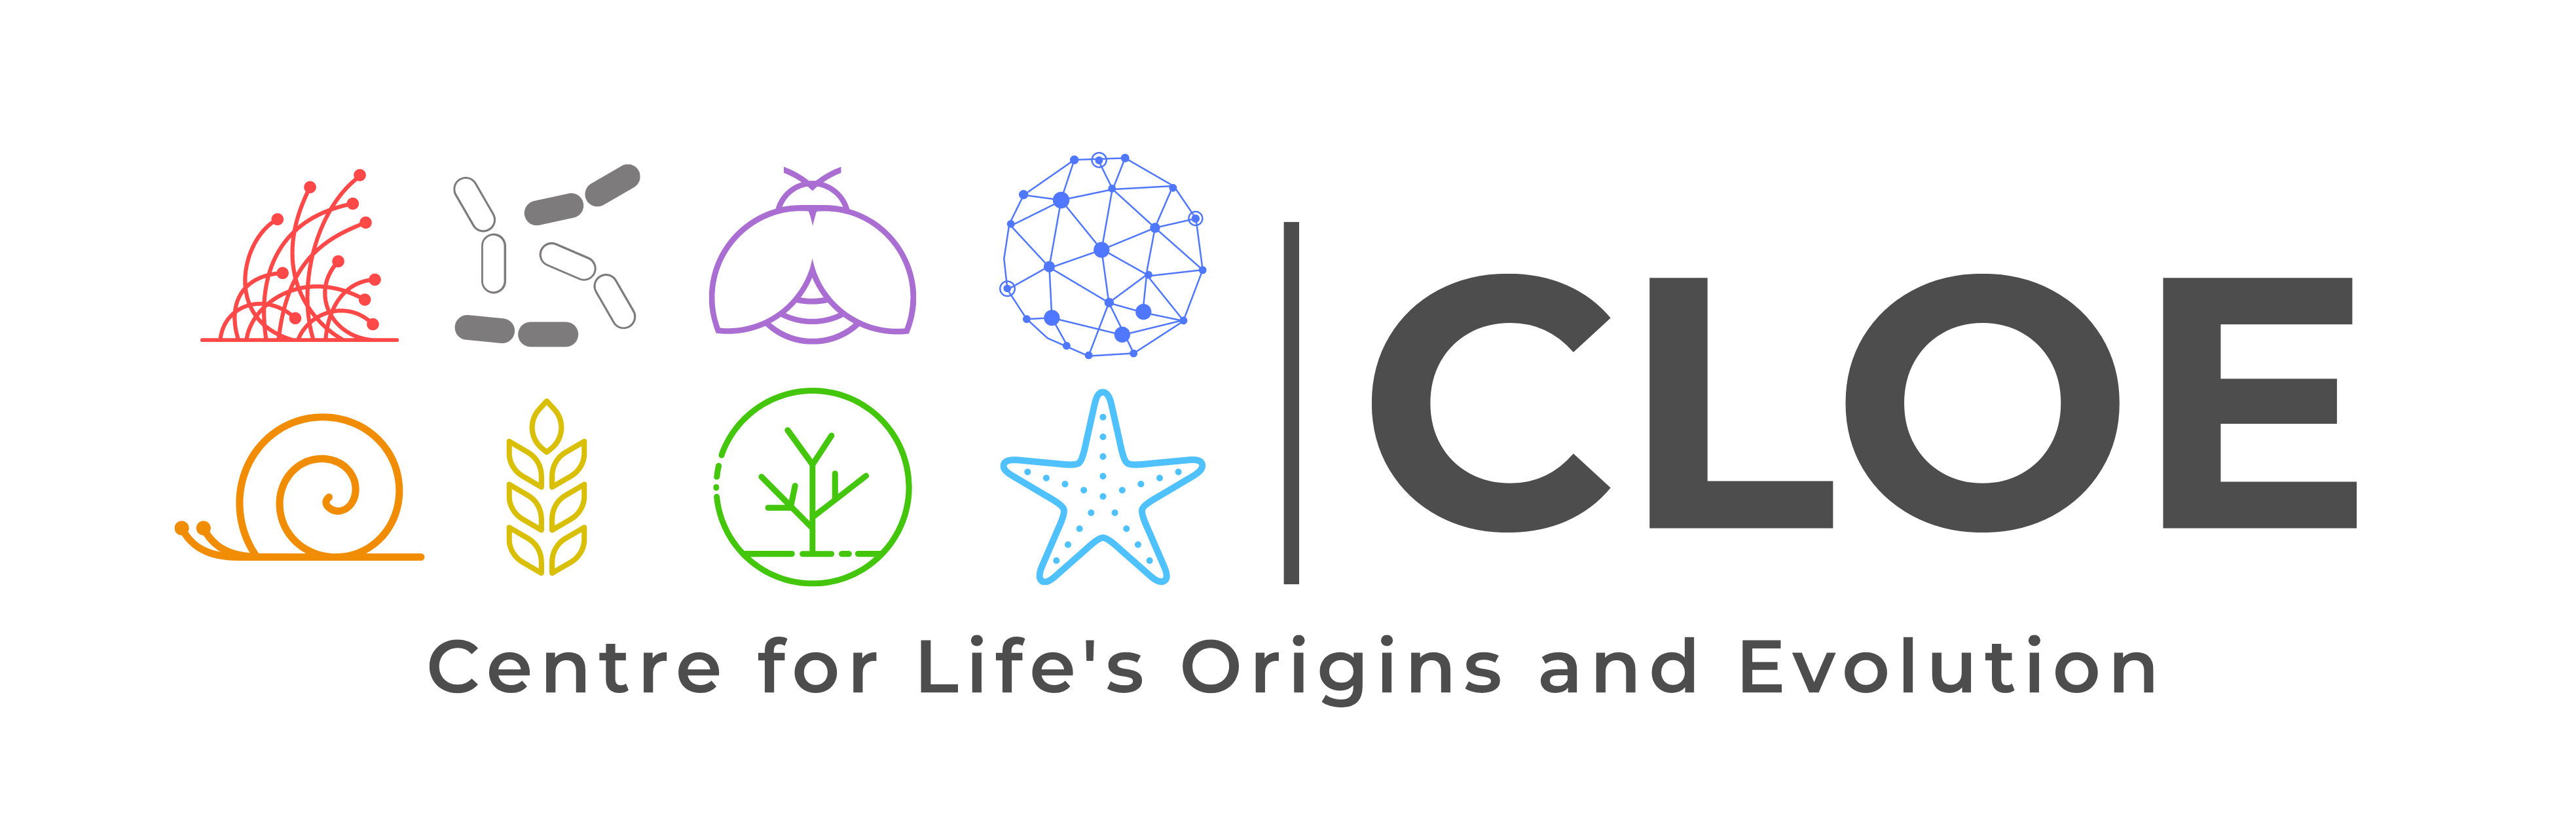 UCL Centre for Life’s Origins and Evolution